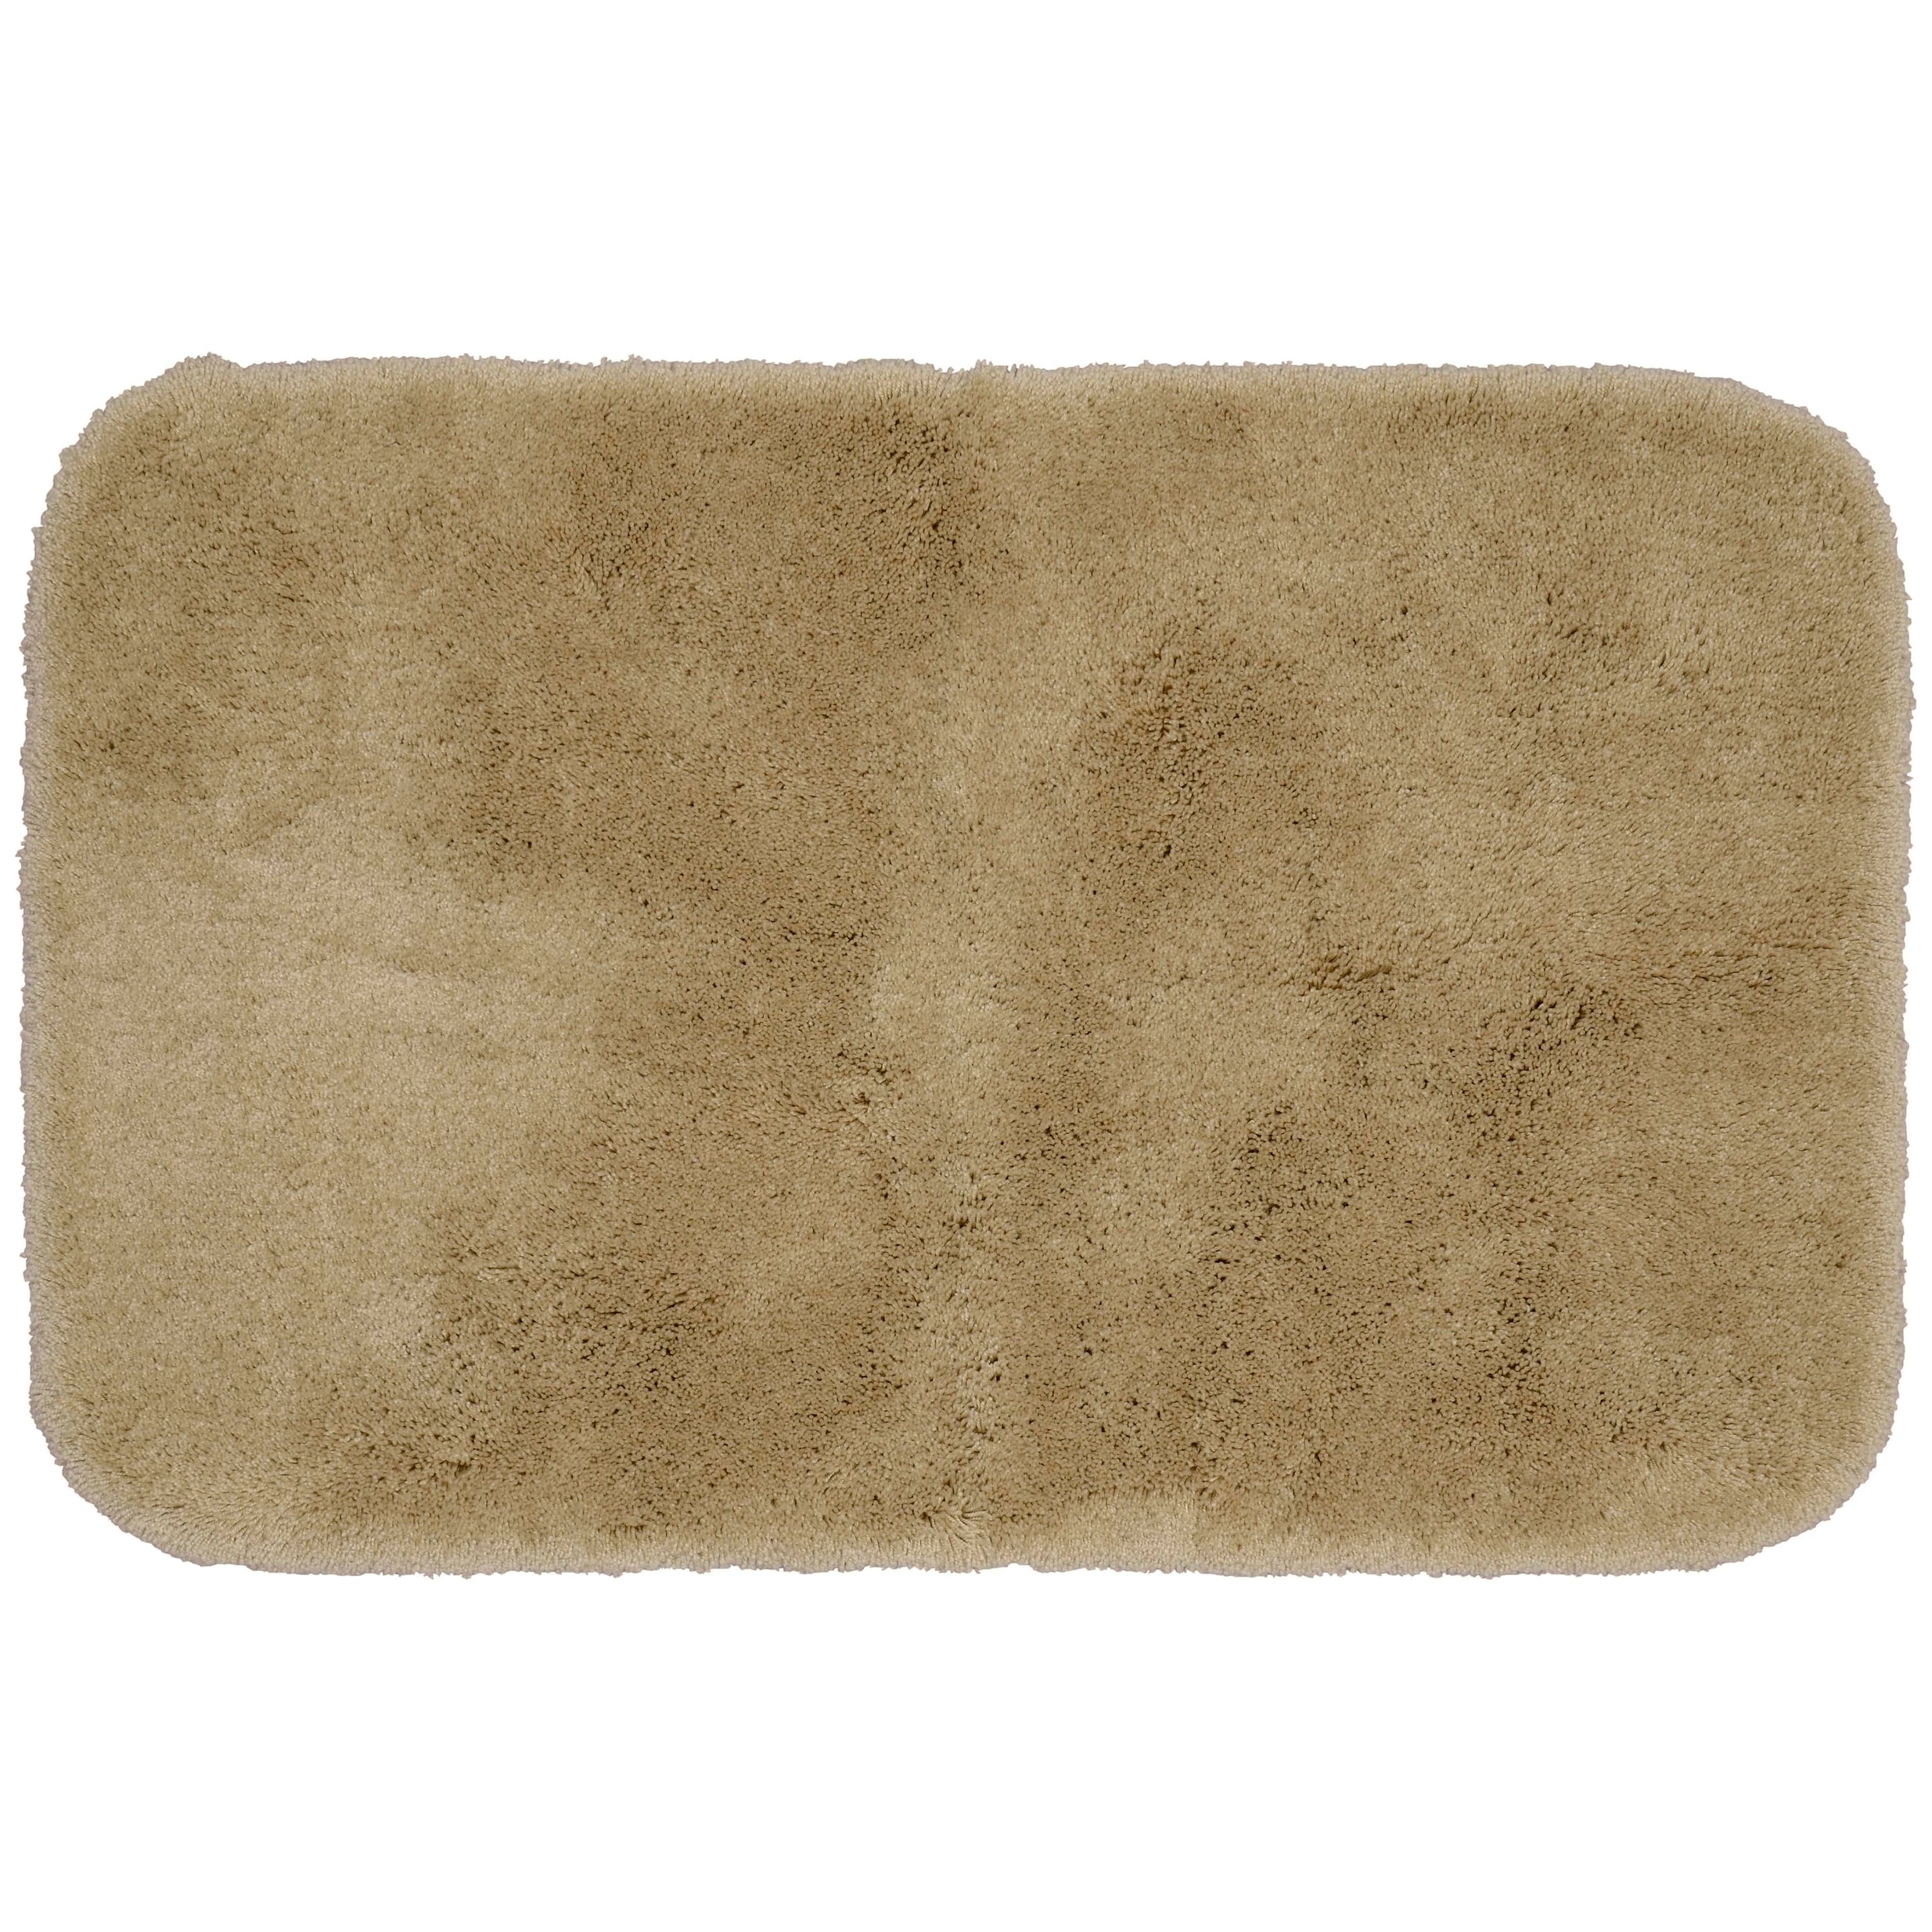 NICETOWN Taupe Bathroom Rugs and Mats Sets, Bath Mats, Slip-Resistant  Absorbent Soft Comfortable and Fluffy Chenille Toilet Rugs, Floor Mats Dry  Fast, Machine Washable (Set of 2-20 x 32/47 x 24) 